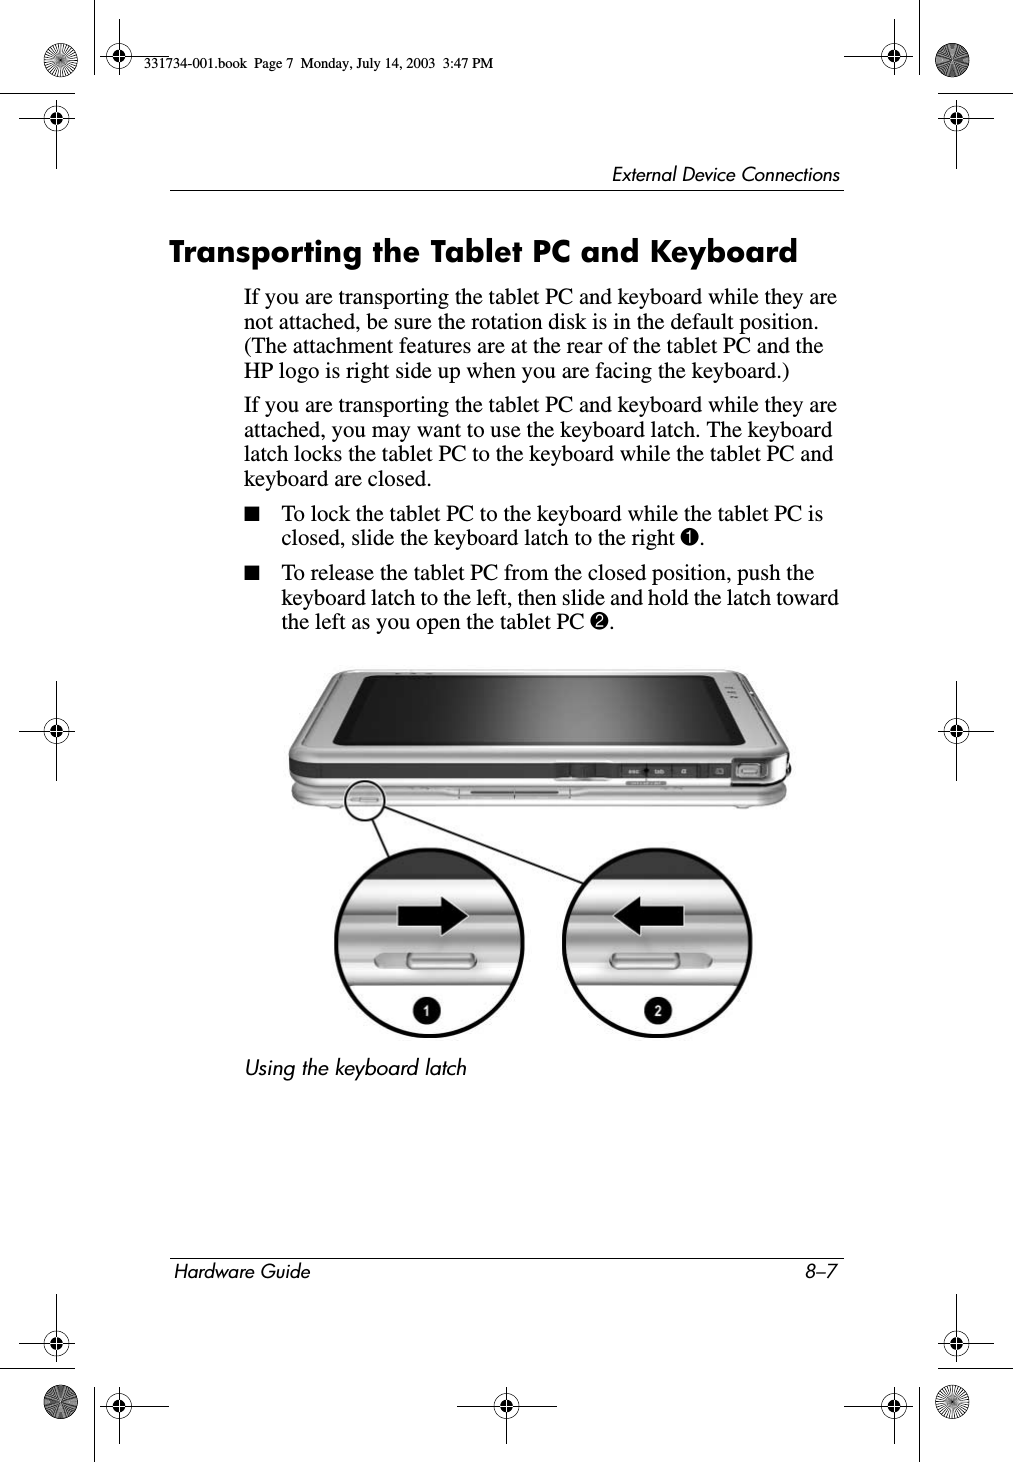 External Device ConnectionsHardware Guide 8–7Transporting the Tablet PC and Keyboard If you are transporting the tablet PC and keyboard while they are not attached, be sure the rotation disk is in the default position. (The attachment features are at the rear of the tablet PC and the HP logo is right side up when you are facing the keyboard.)If you are transporting the tablet PC and keyboard while they are attached, you may want to use the keyboard latch. The keyboard latch locks the tablet PC to the keyboard while the tablet PC and keyboard are closed.■To lock the tablet PC to the keyboard while the tablet PC is closed, slide the keyboard latch to the right 1.■To release the tablet PC from the closed position, push the keyboard latch to the left, then slide and hold the latch toward the left as you open the tablet PC 2.Using the keyboard latch331734-001.book  Page 7  Monday, July 14, 2003  3:47 PM